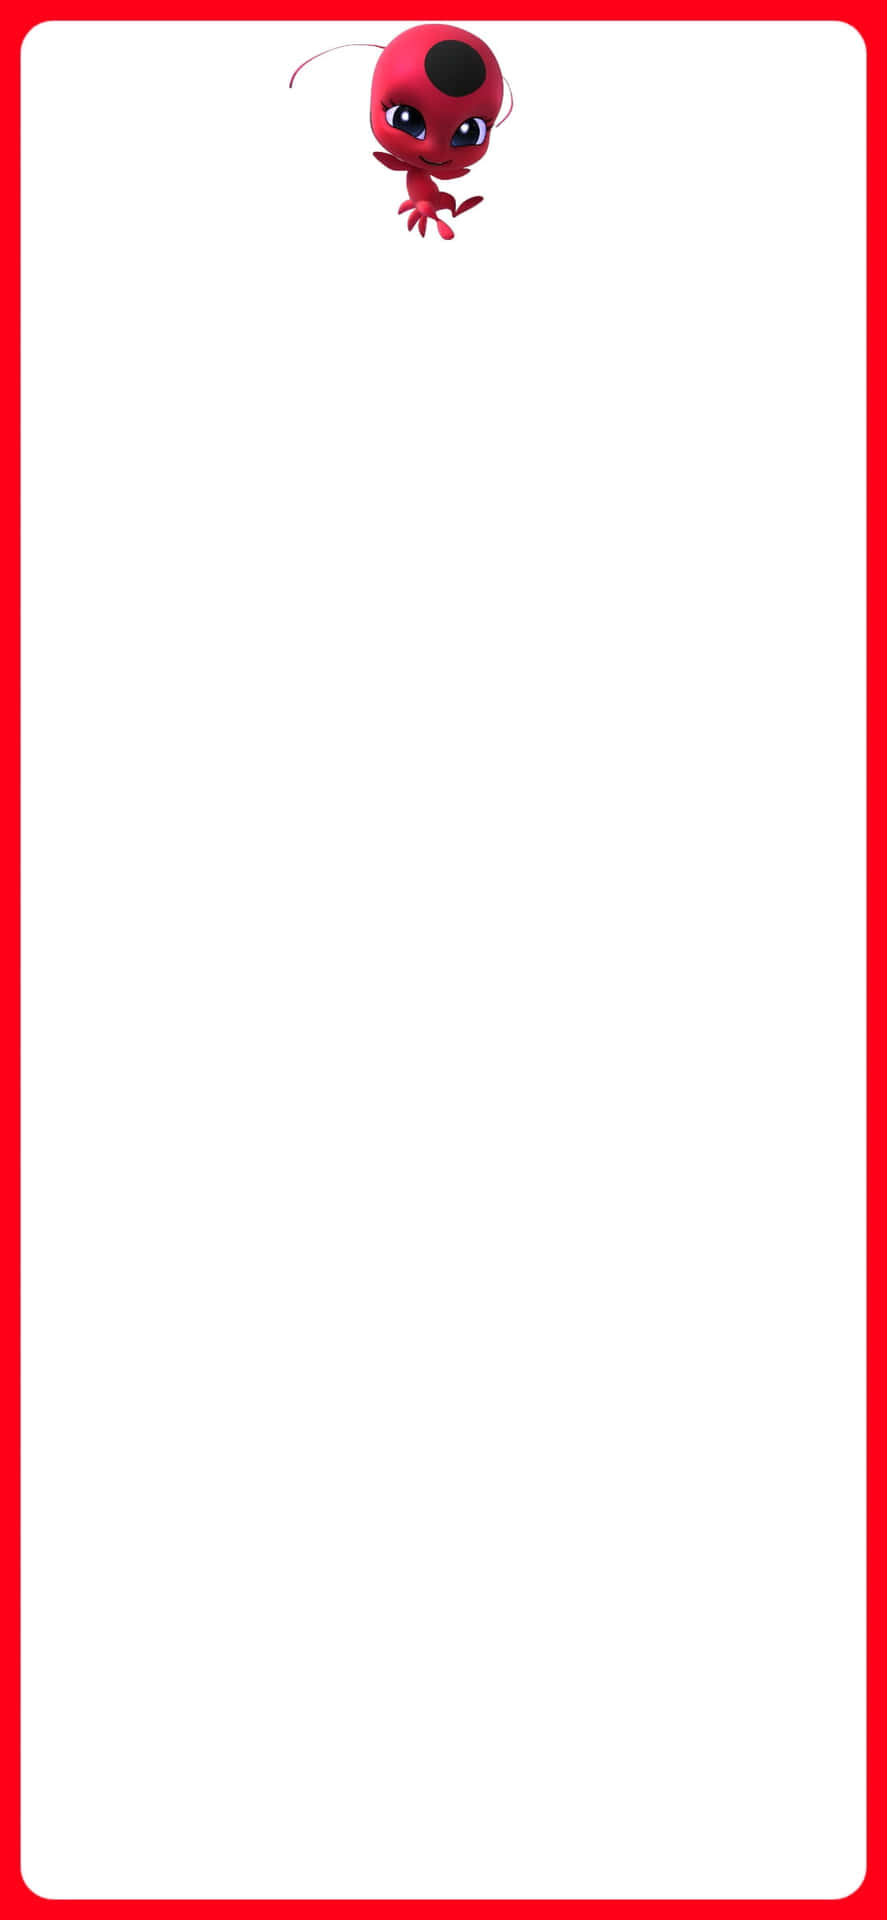 A Red And White Frame With A Red And White Monster Background